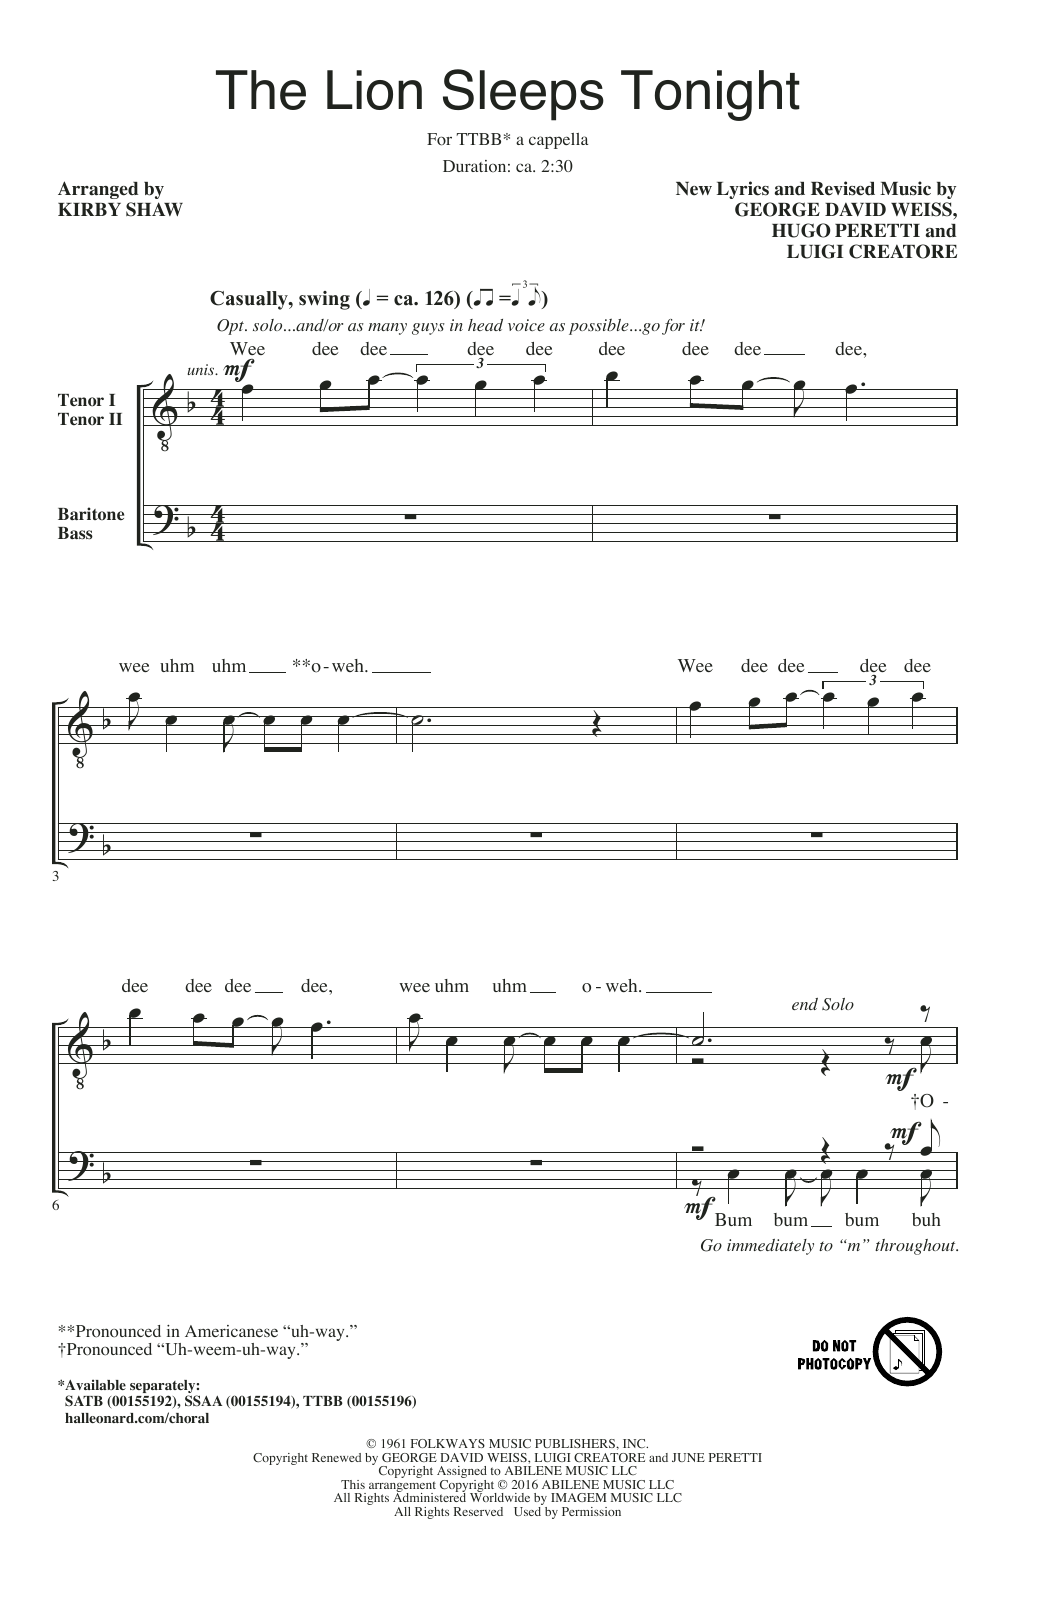 Download The Tokens The Lion Sleeps Tonight (arr. Kirby Sha Sheet Music